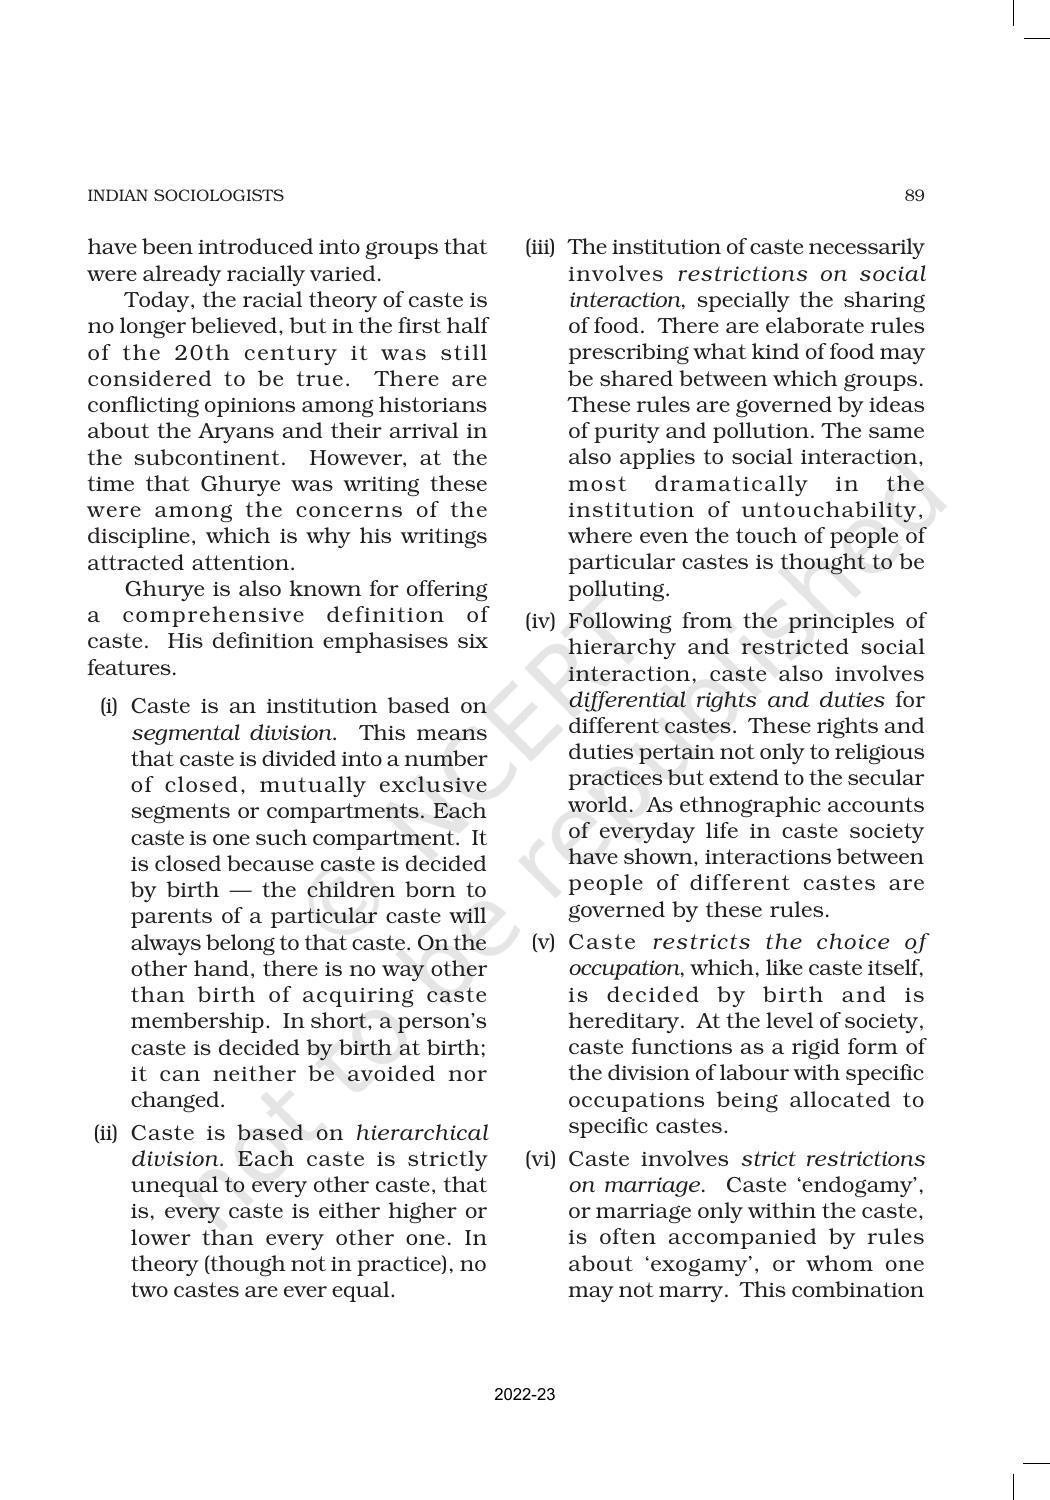 NCERT Book for Class 11 Sociology (Part-II) Chapter 5 Indian Sociologists - Page 7